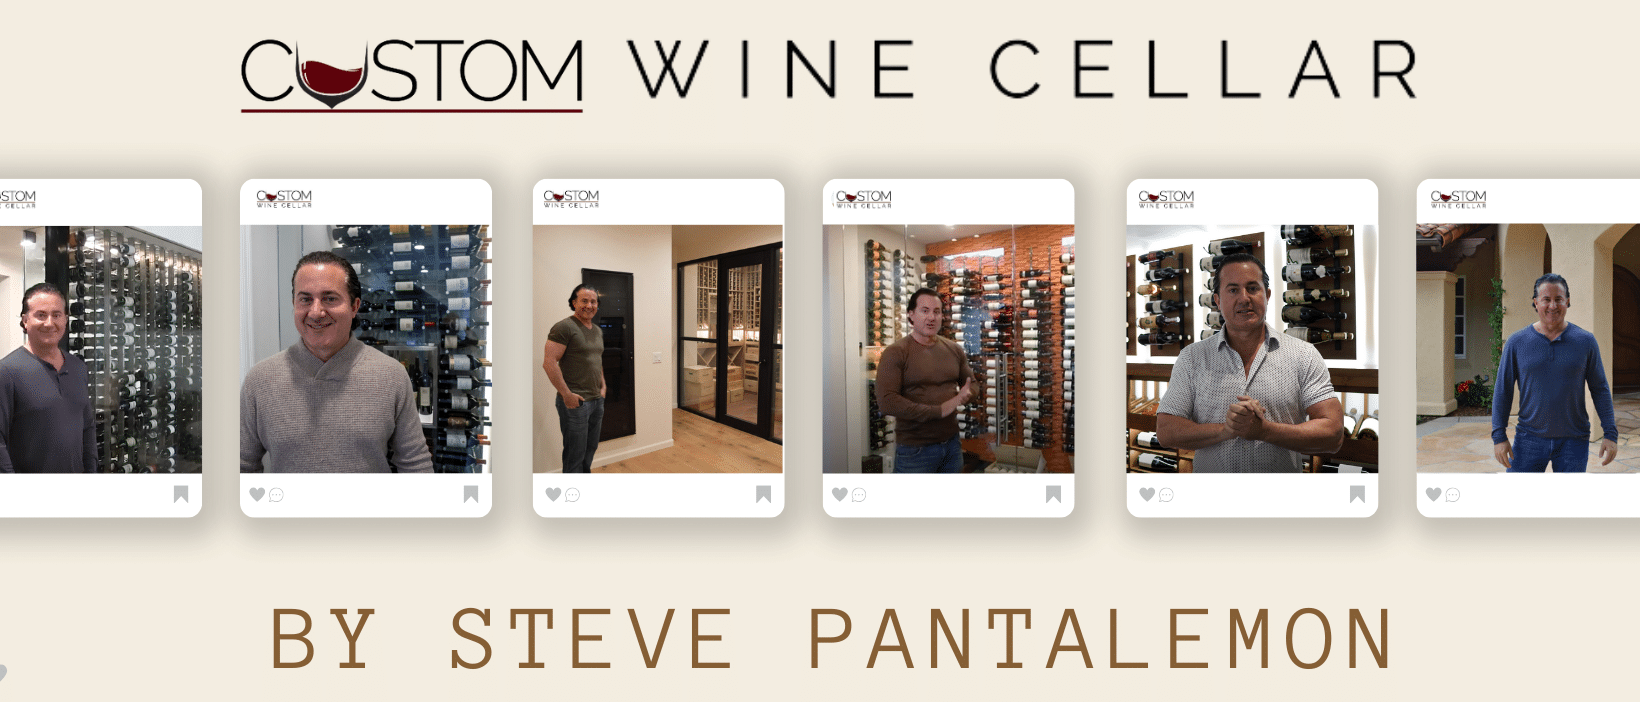 Custom Wine Cellar: Gallery of Exceptional Wine Cellar Projects